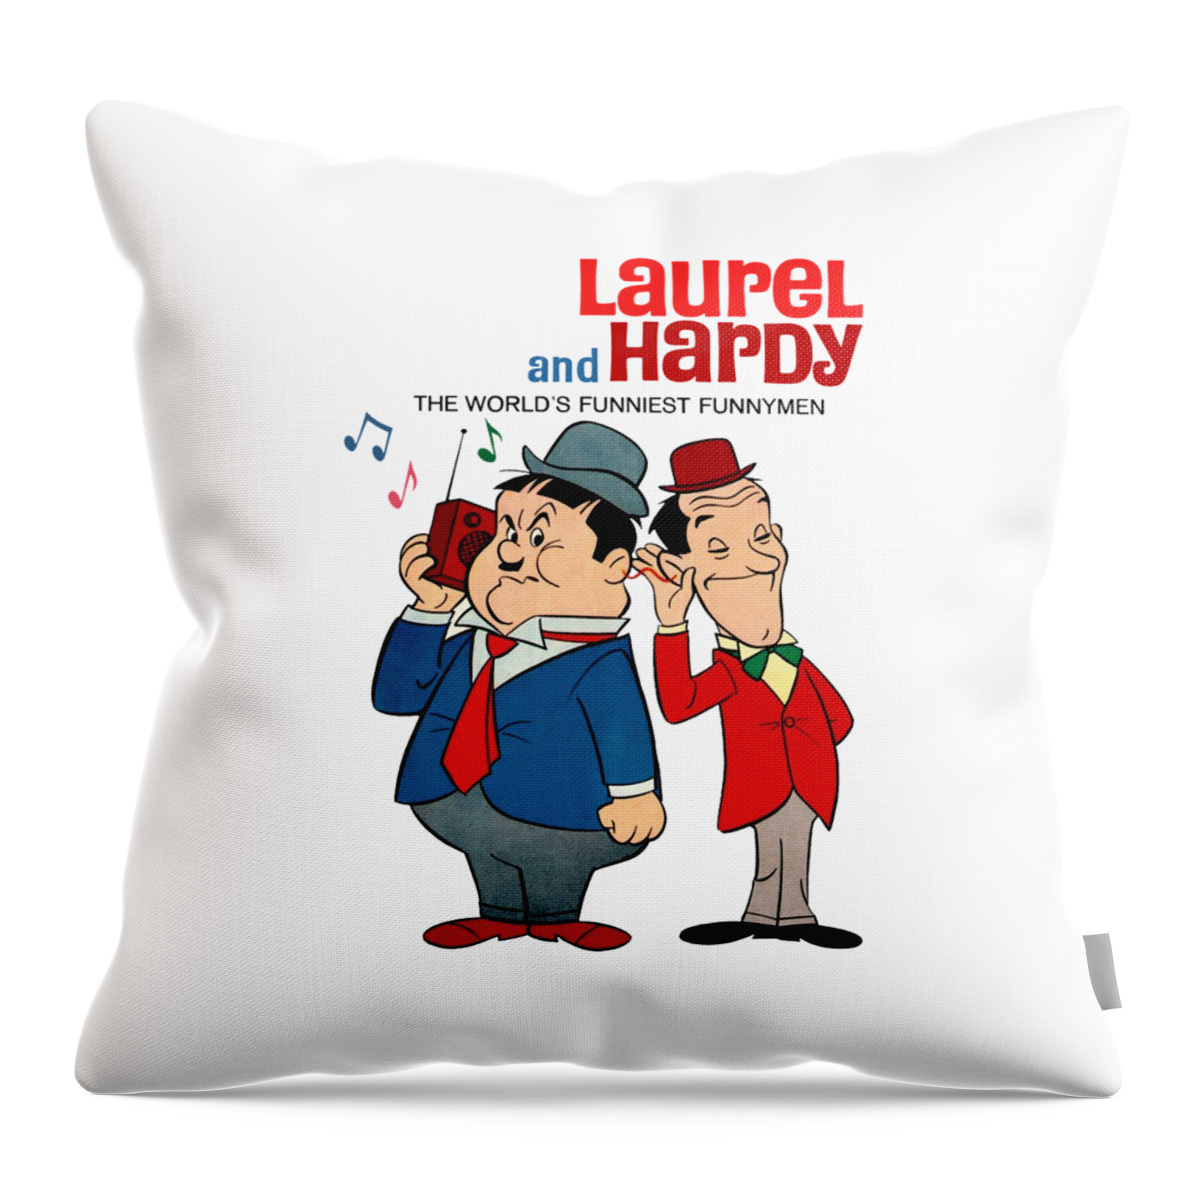 Comedy Throw Pillow featuring the digital art Eavesdropping On Someone by Sybil White